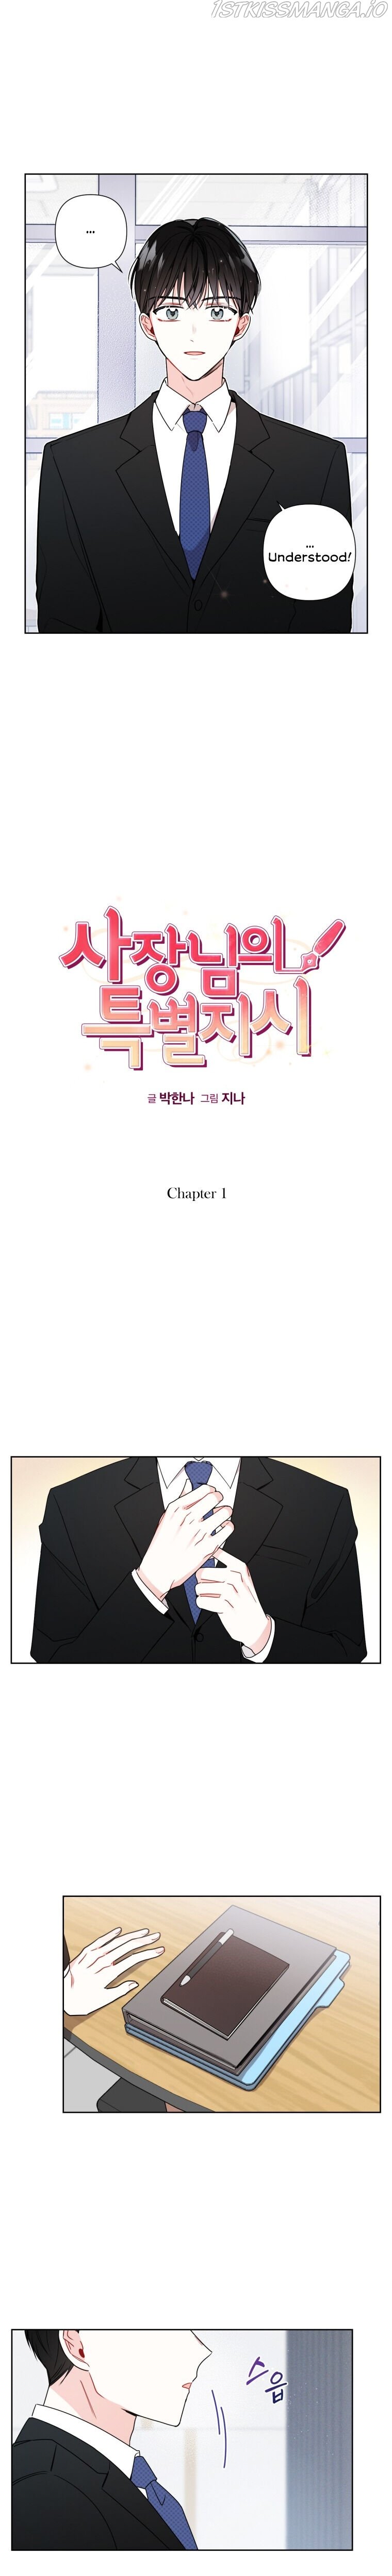 Married to my boss chapter 1